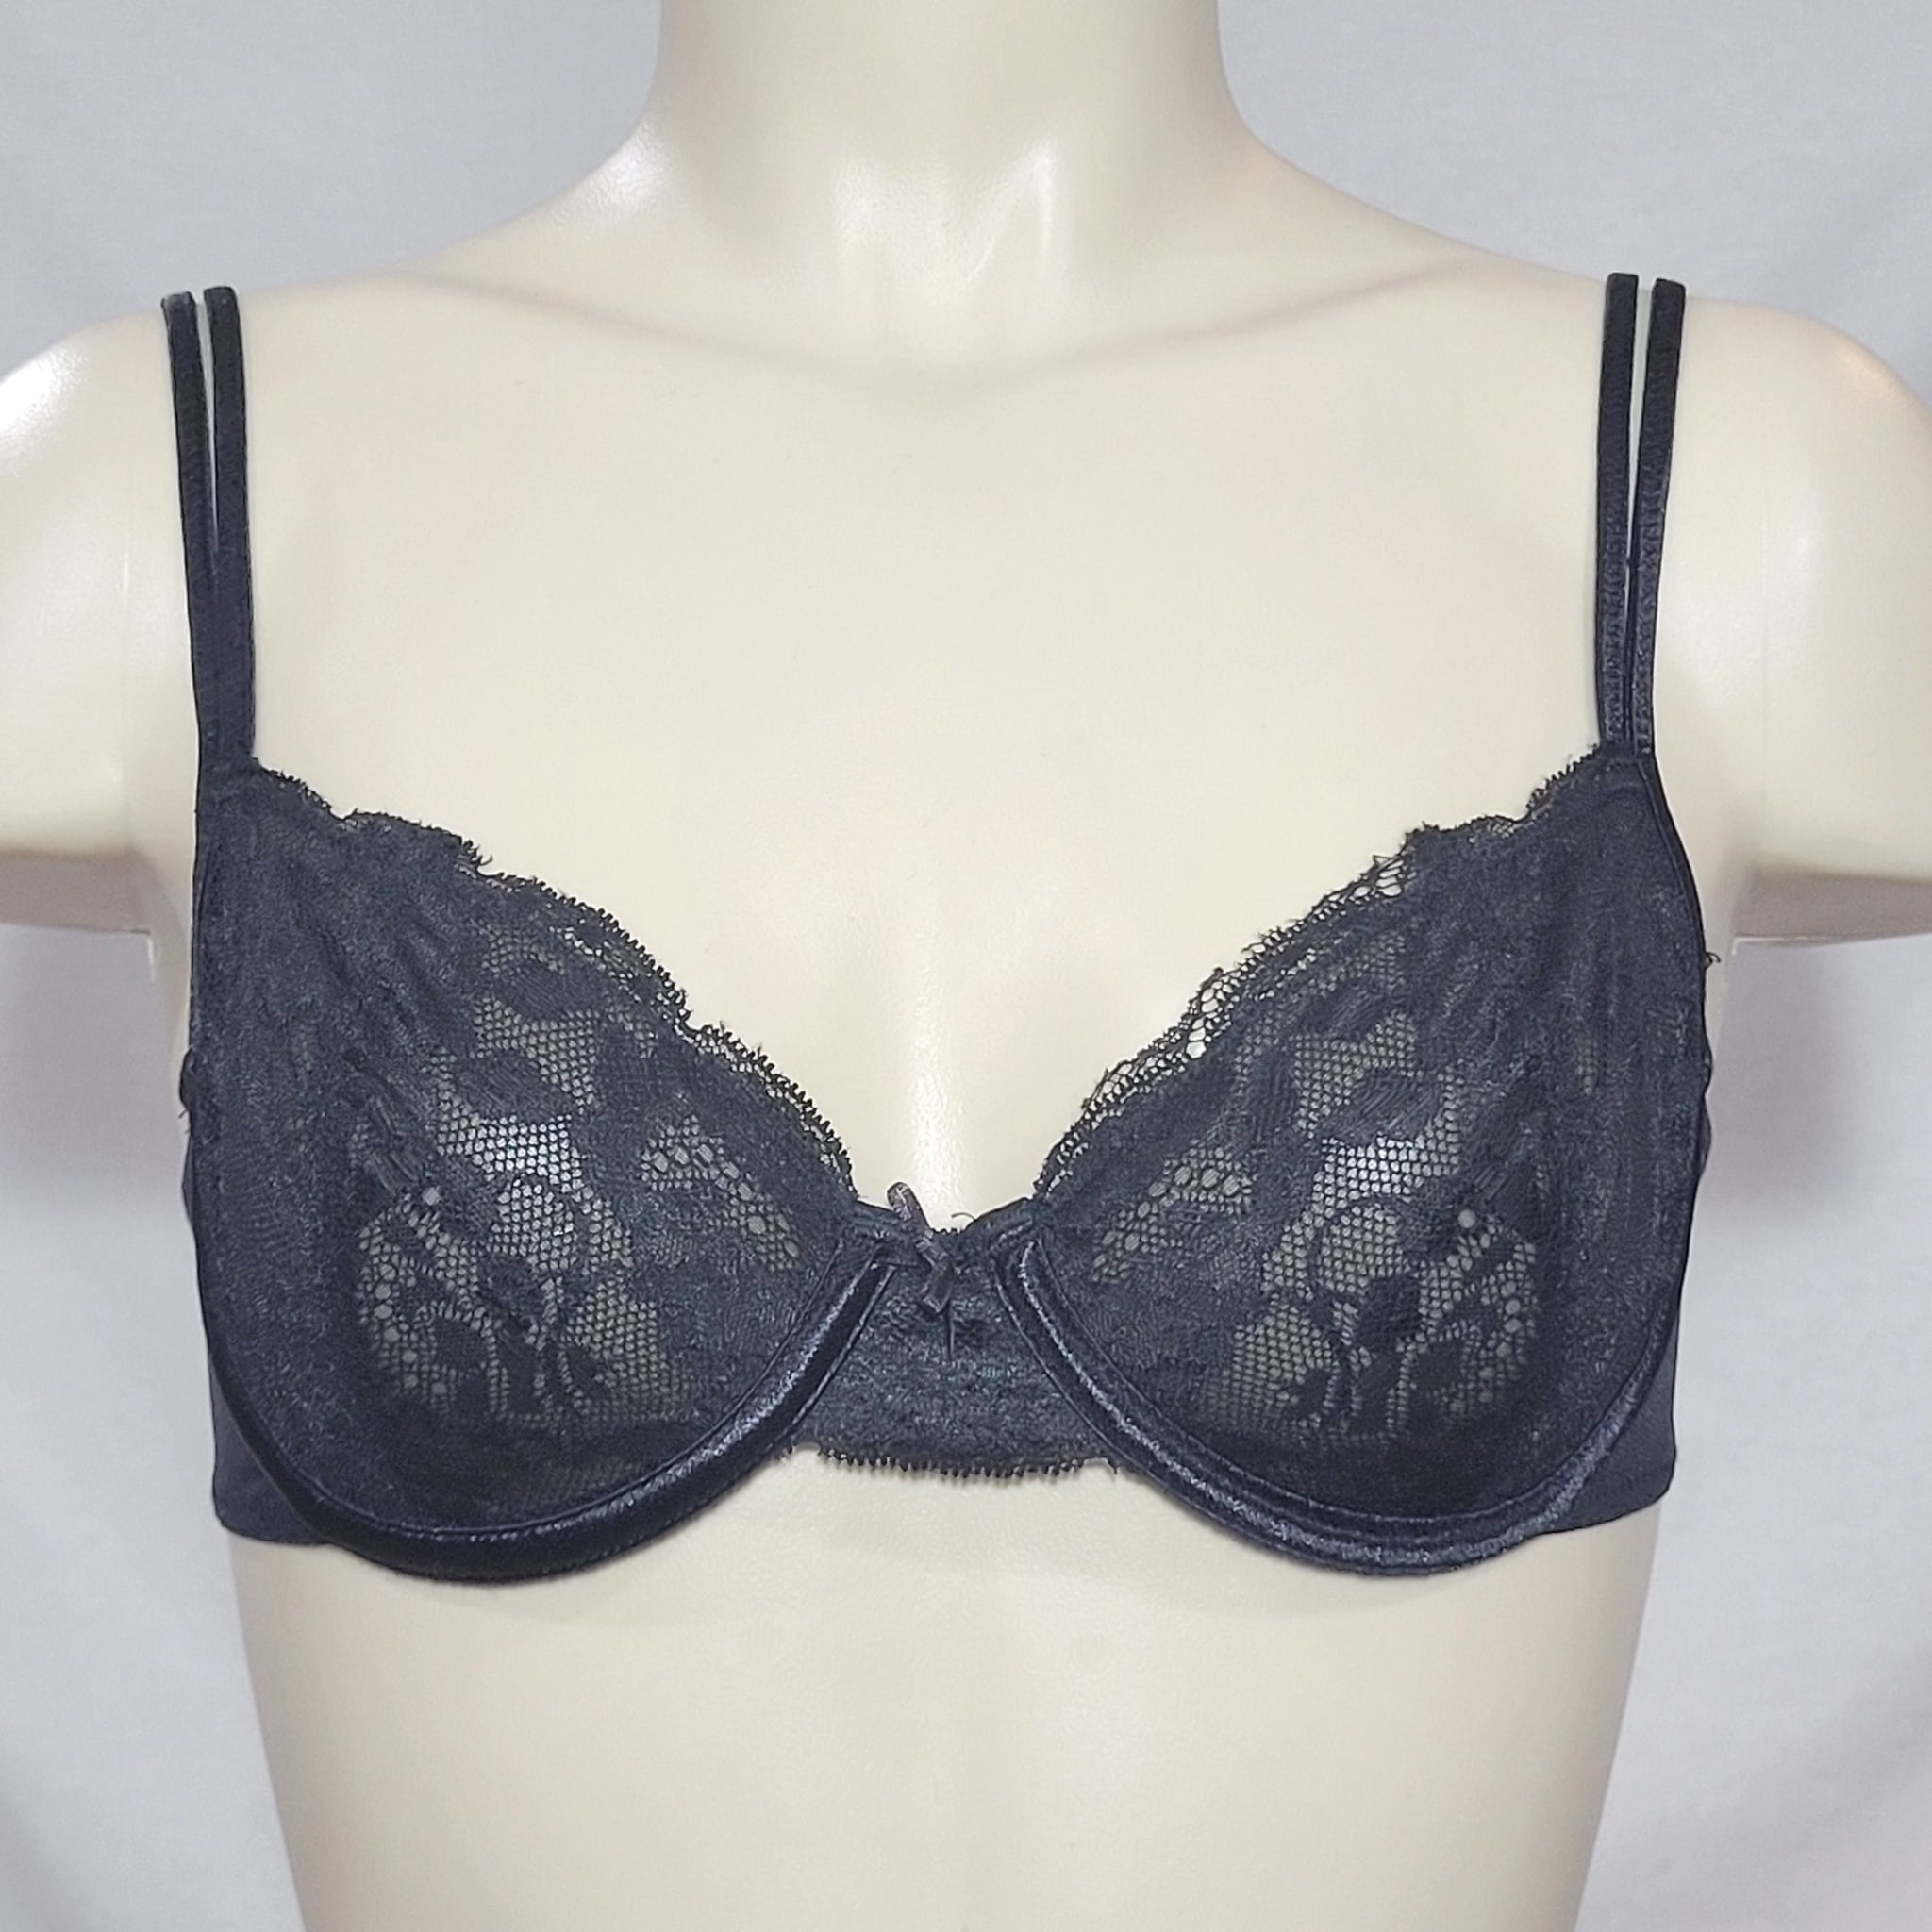 Lily of France 2101215 Sheer Lace and Mesh Underwire Bra 34B